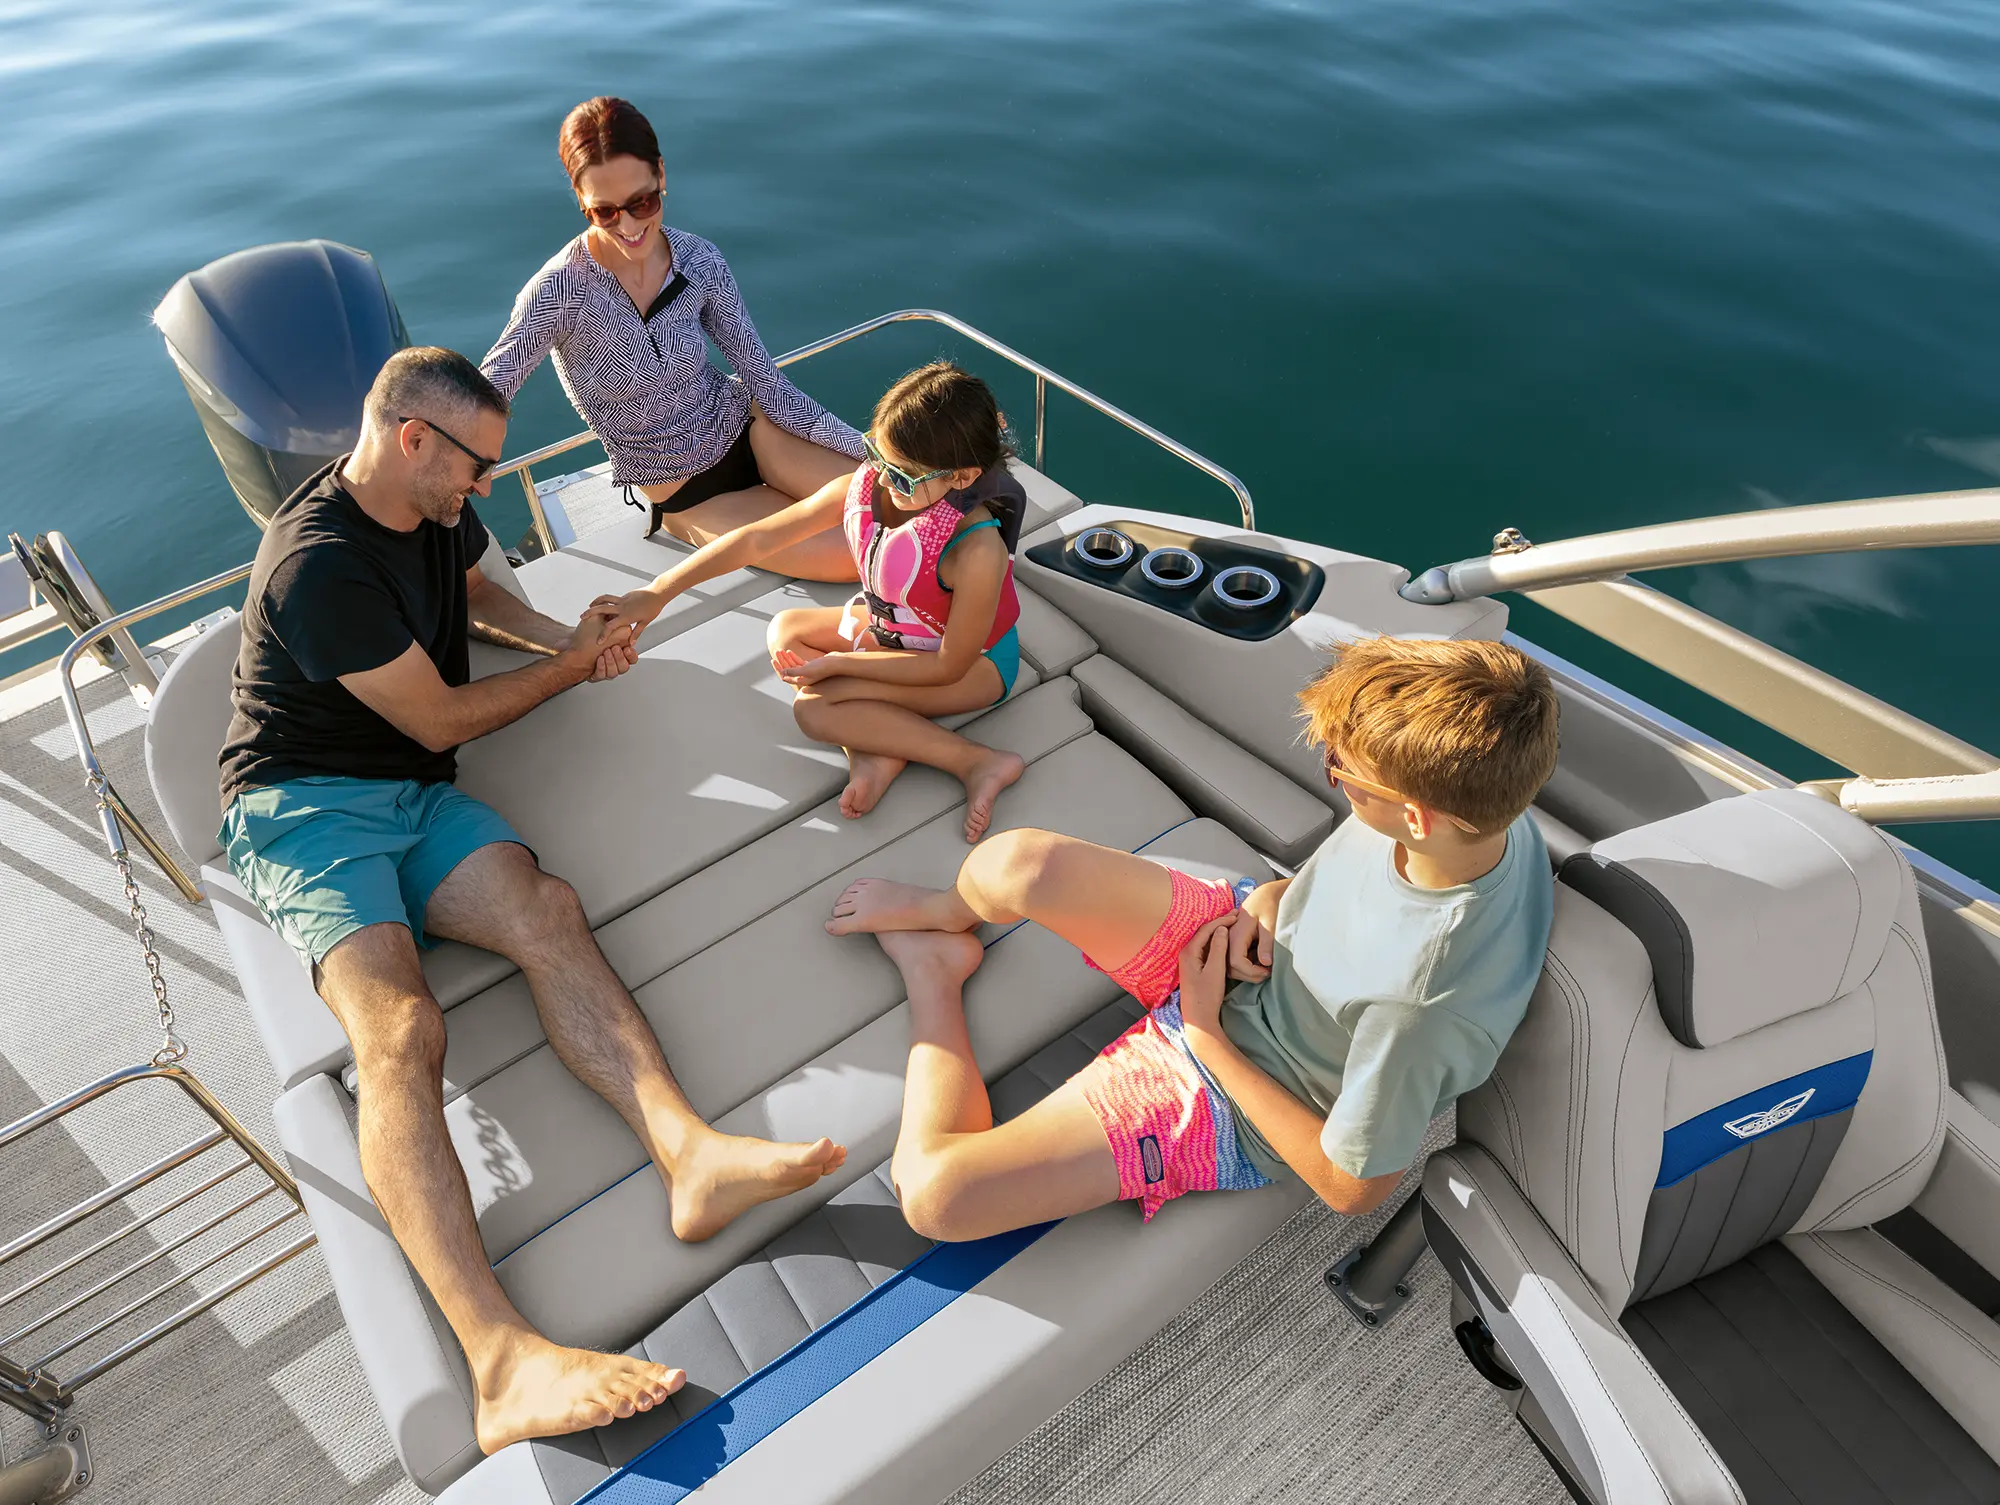 Family of four seen resting inside the Bennington Sport 24 LXSSBA pontoon motorboat vehicle out in the water during the day as all of them are wearing sunglasses and are in beach attire